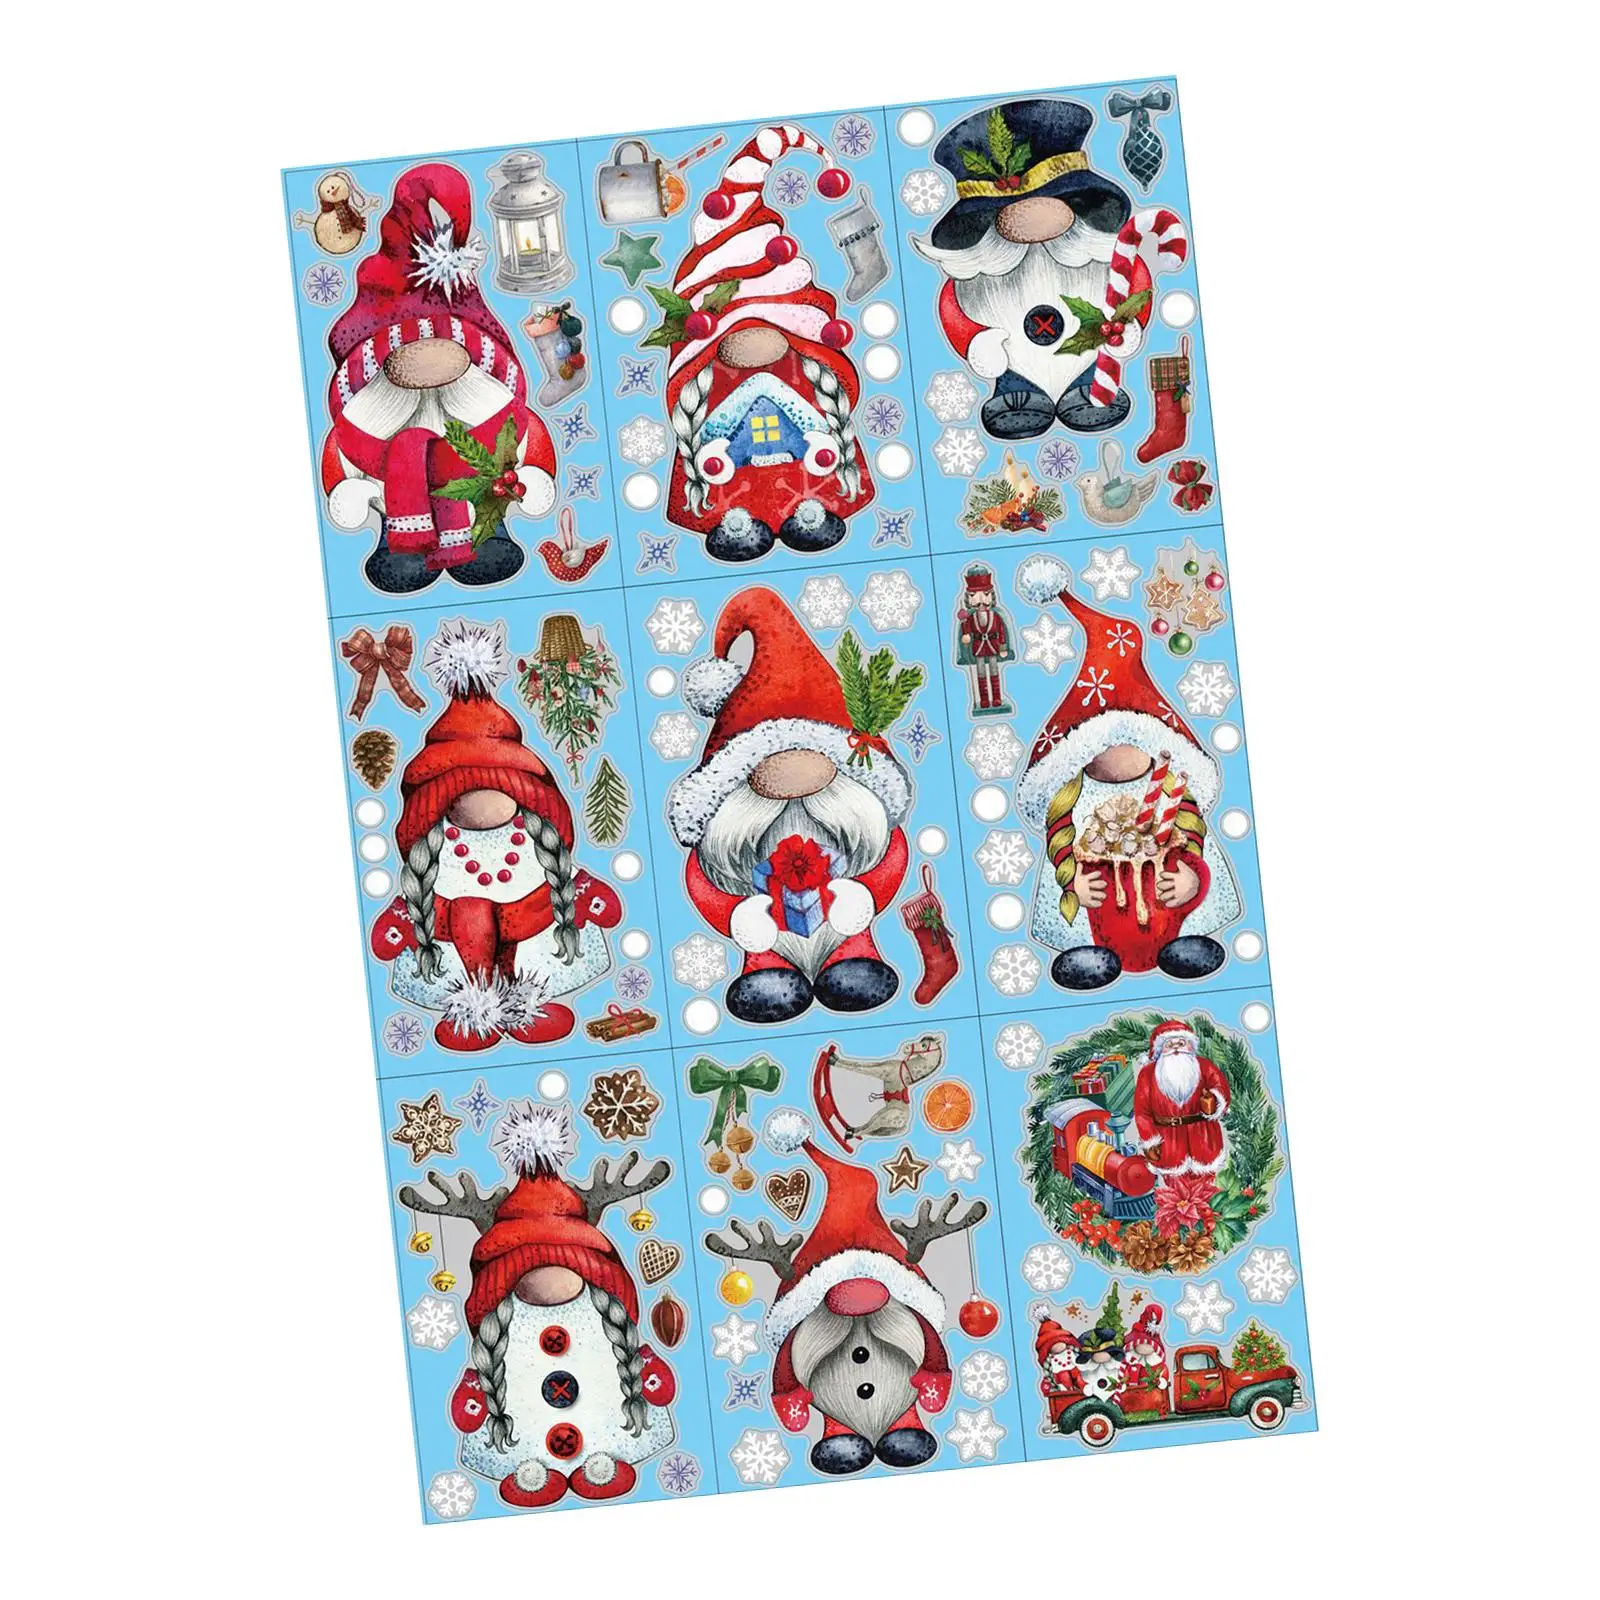 9 Pieces Christmas Window Clings Xmas Stickers for Festival Fridge Bedroom